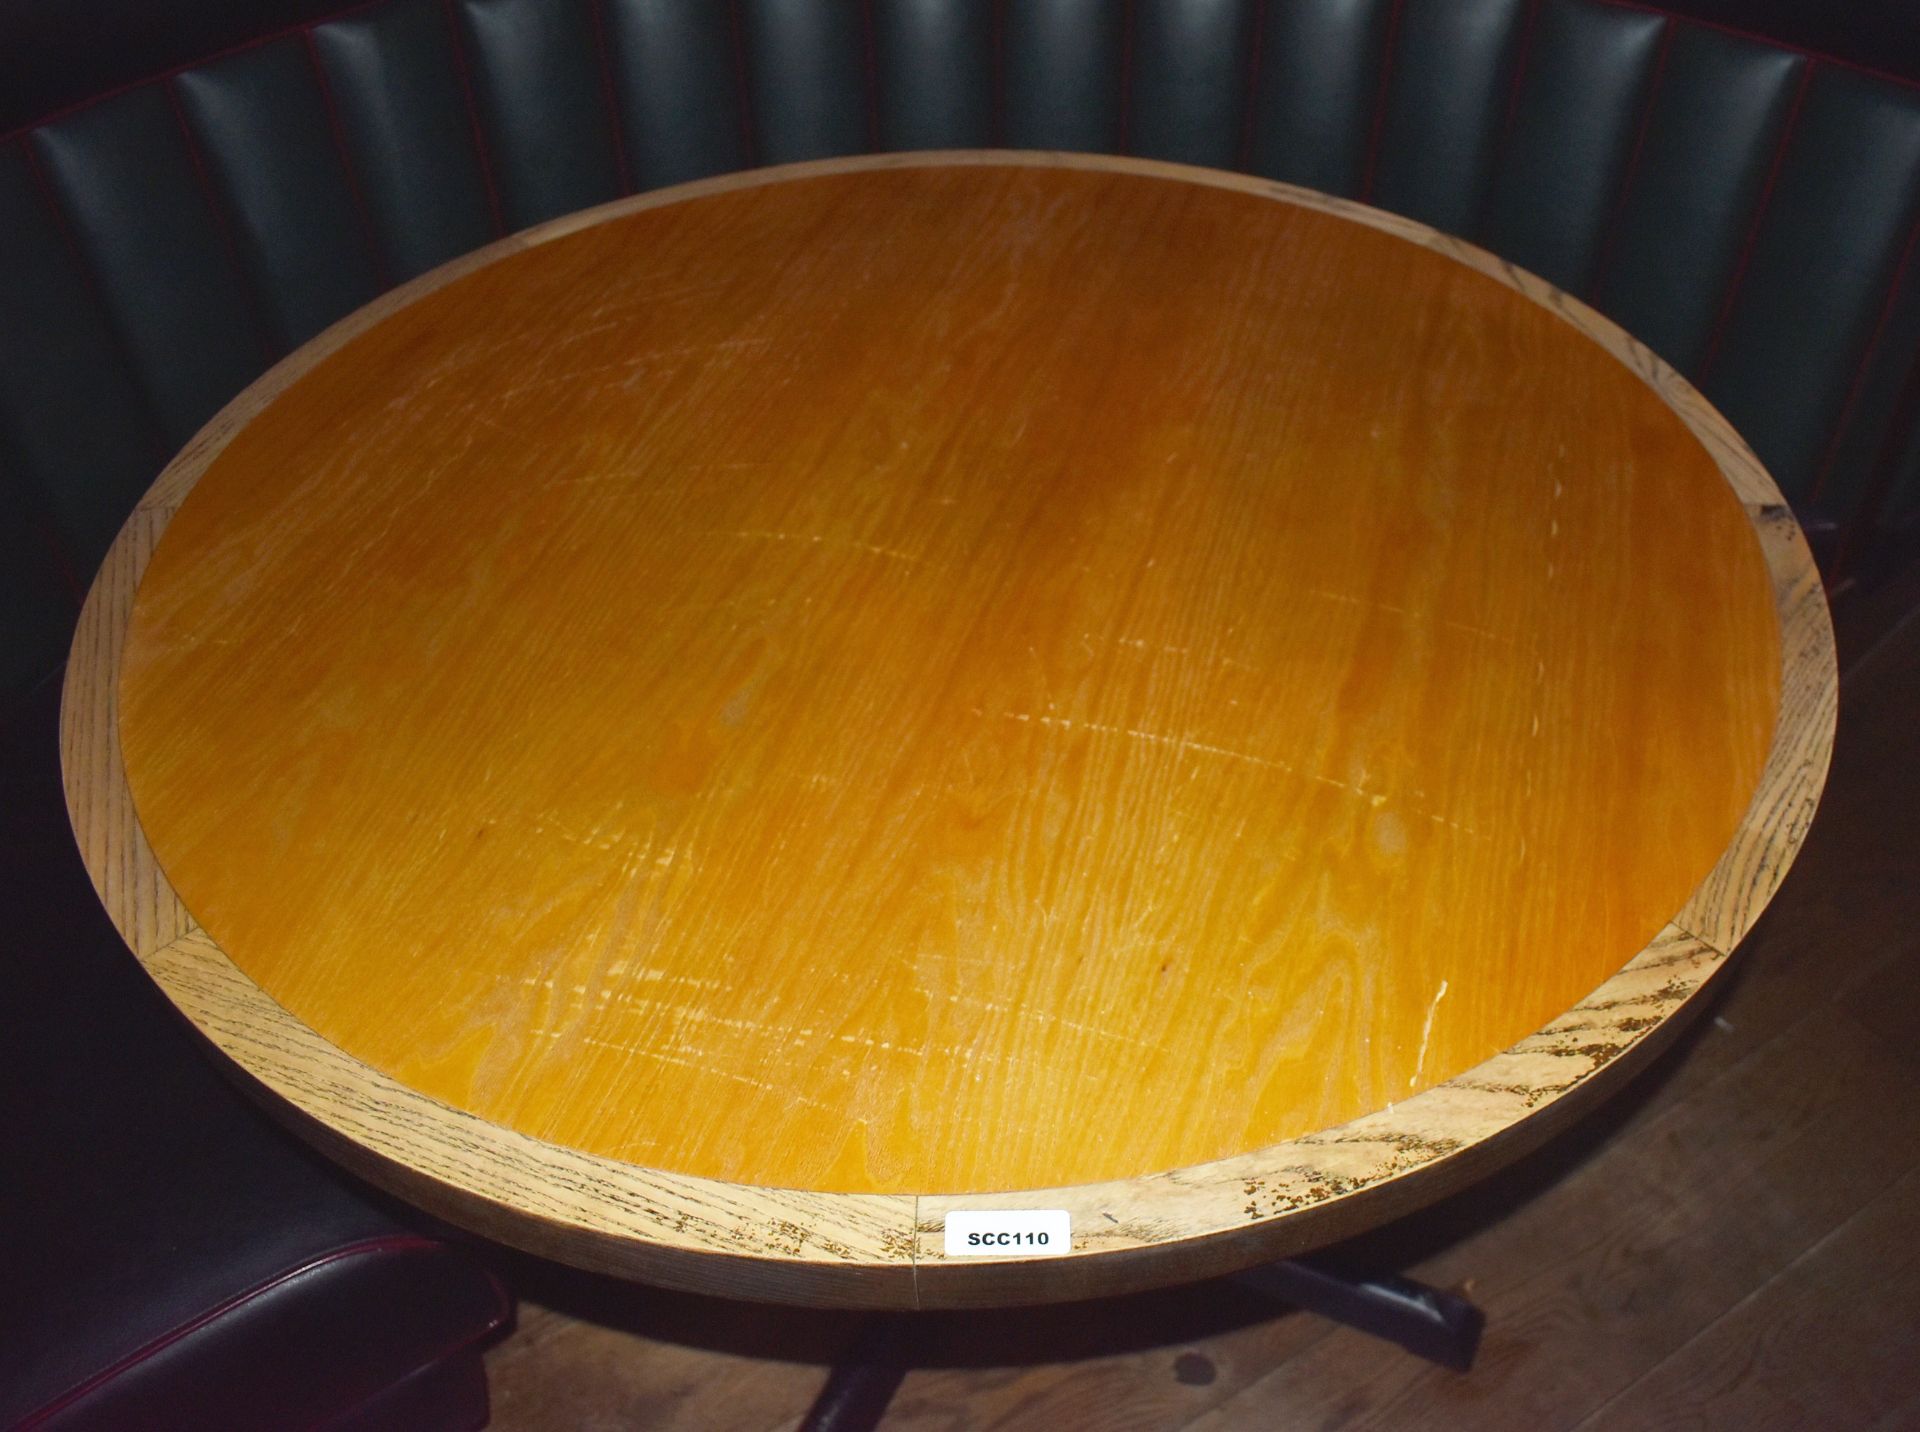 1 x Round Restaurant Table With a 105cm Diameter - Features a Two Tone Wooden Top and Cast Iron Base - Image 2 of 3